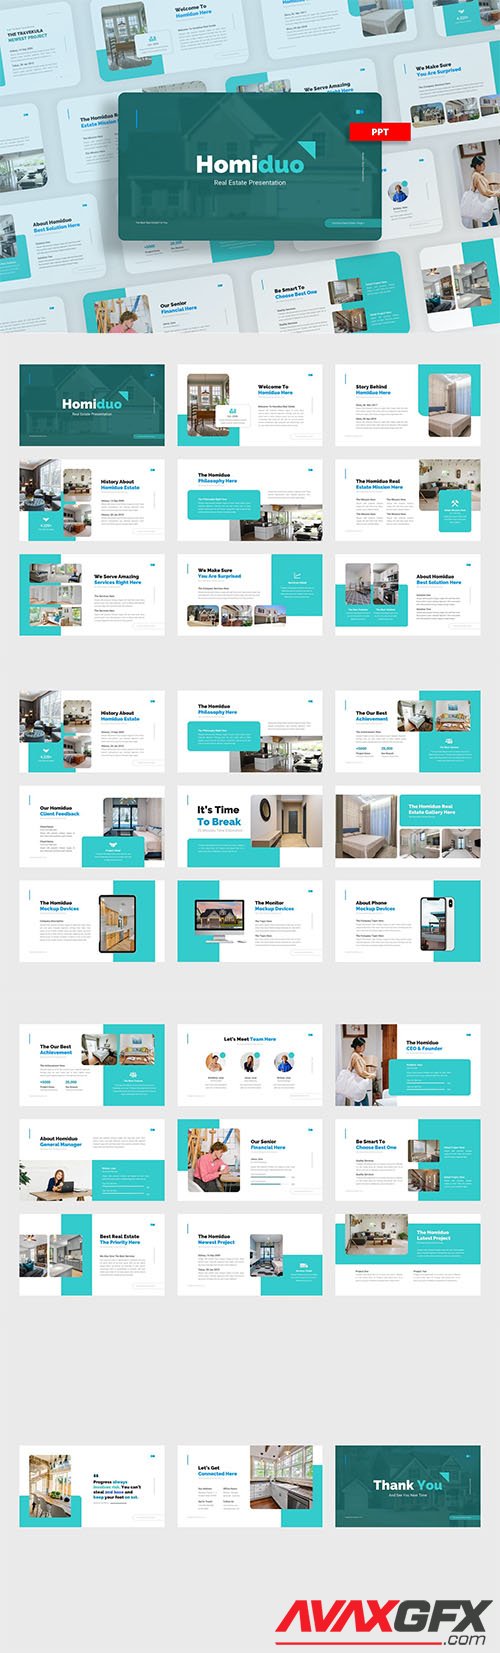 Homiduo Real Estate PowerPoint Template CKYEY6P